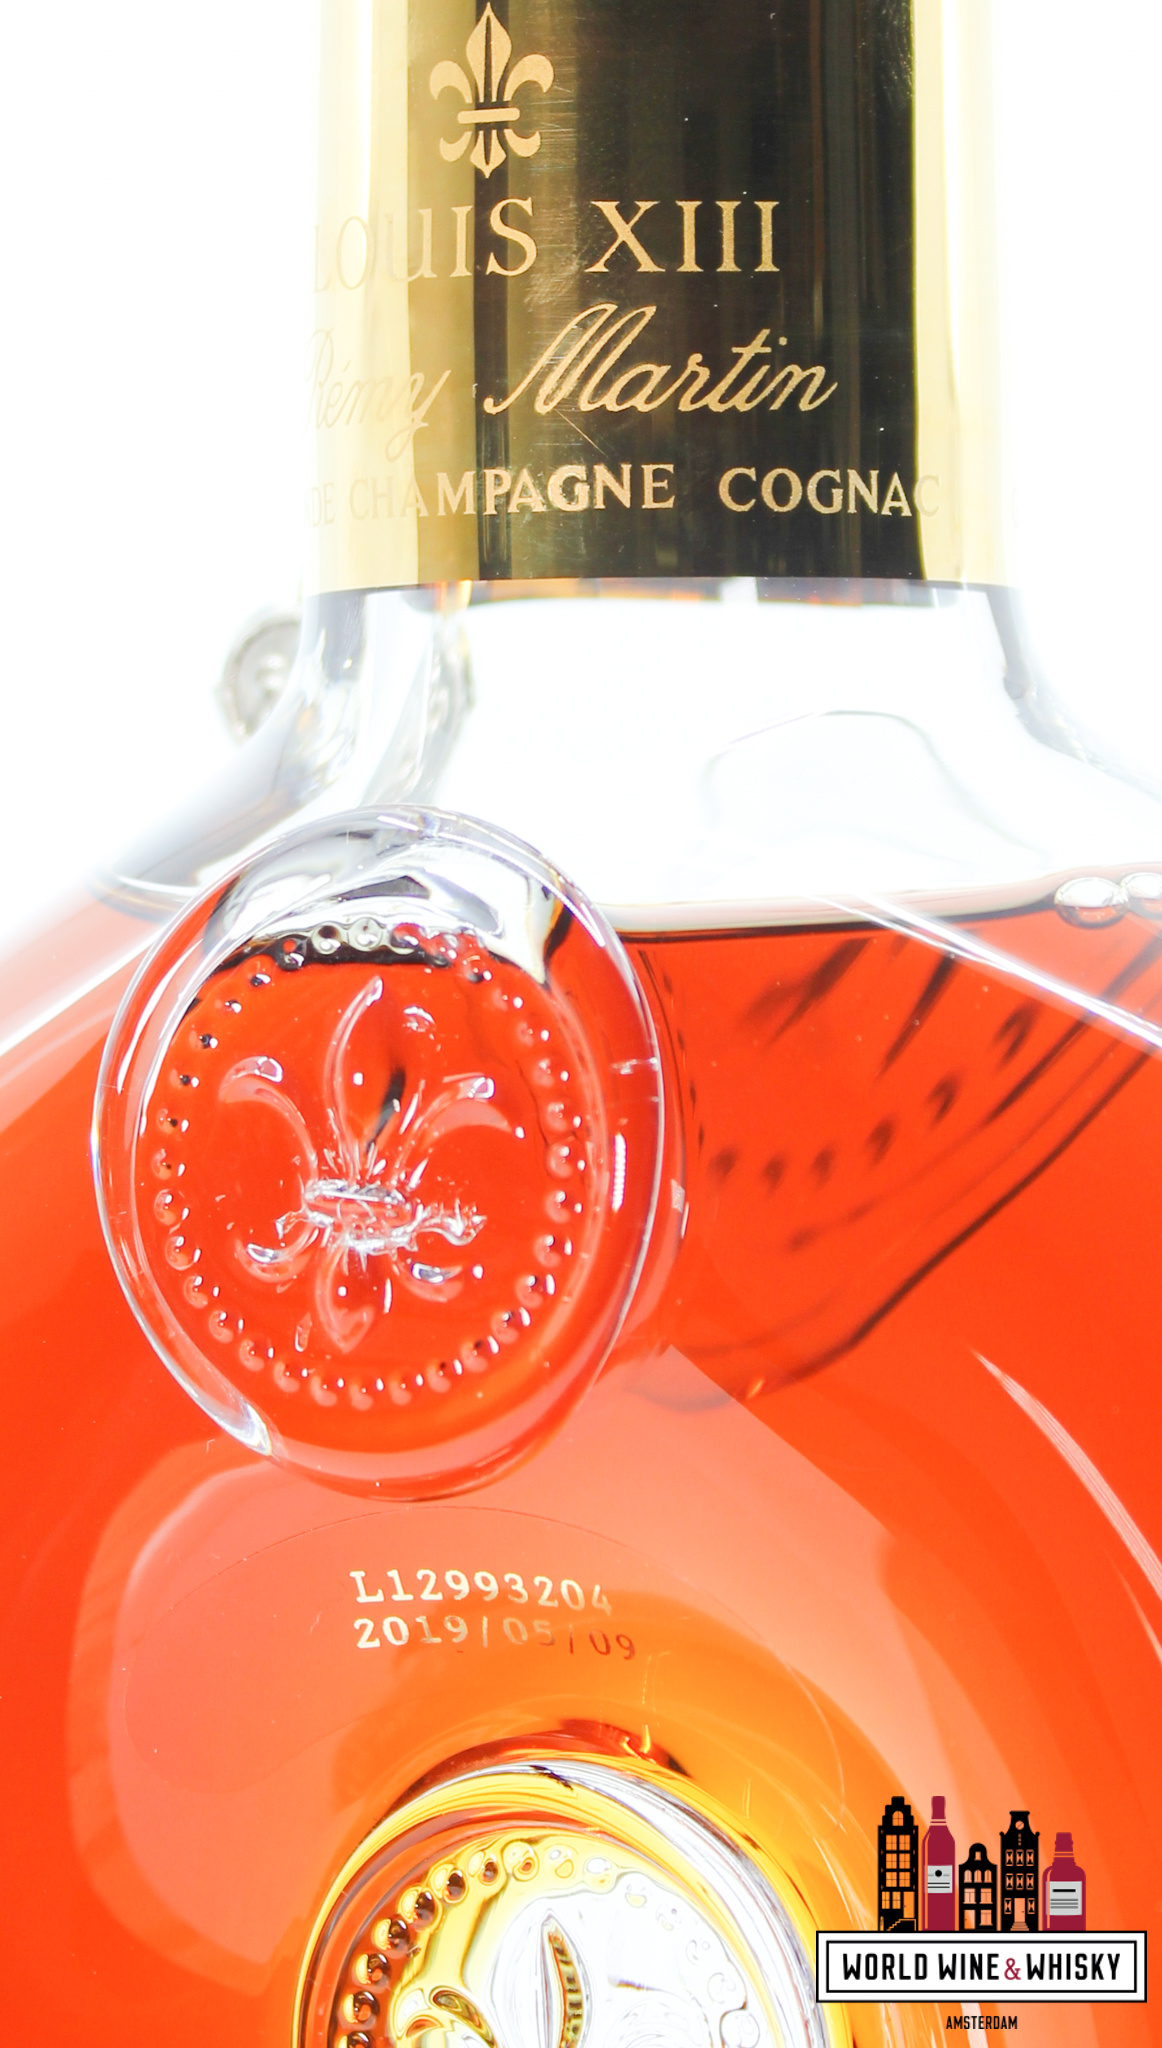 Remy Martin Louis XIII - Grande Champagne Cognac Baccarat Decanter 40%